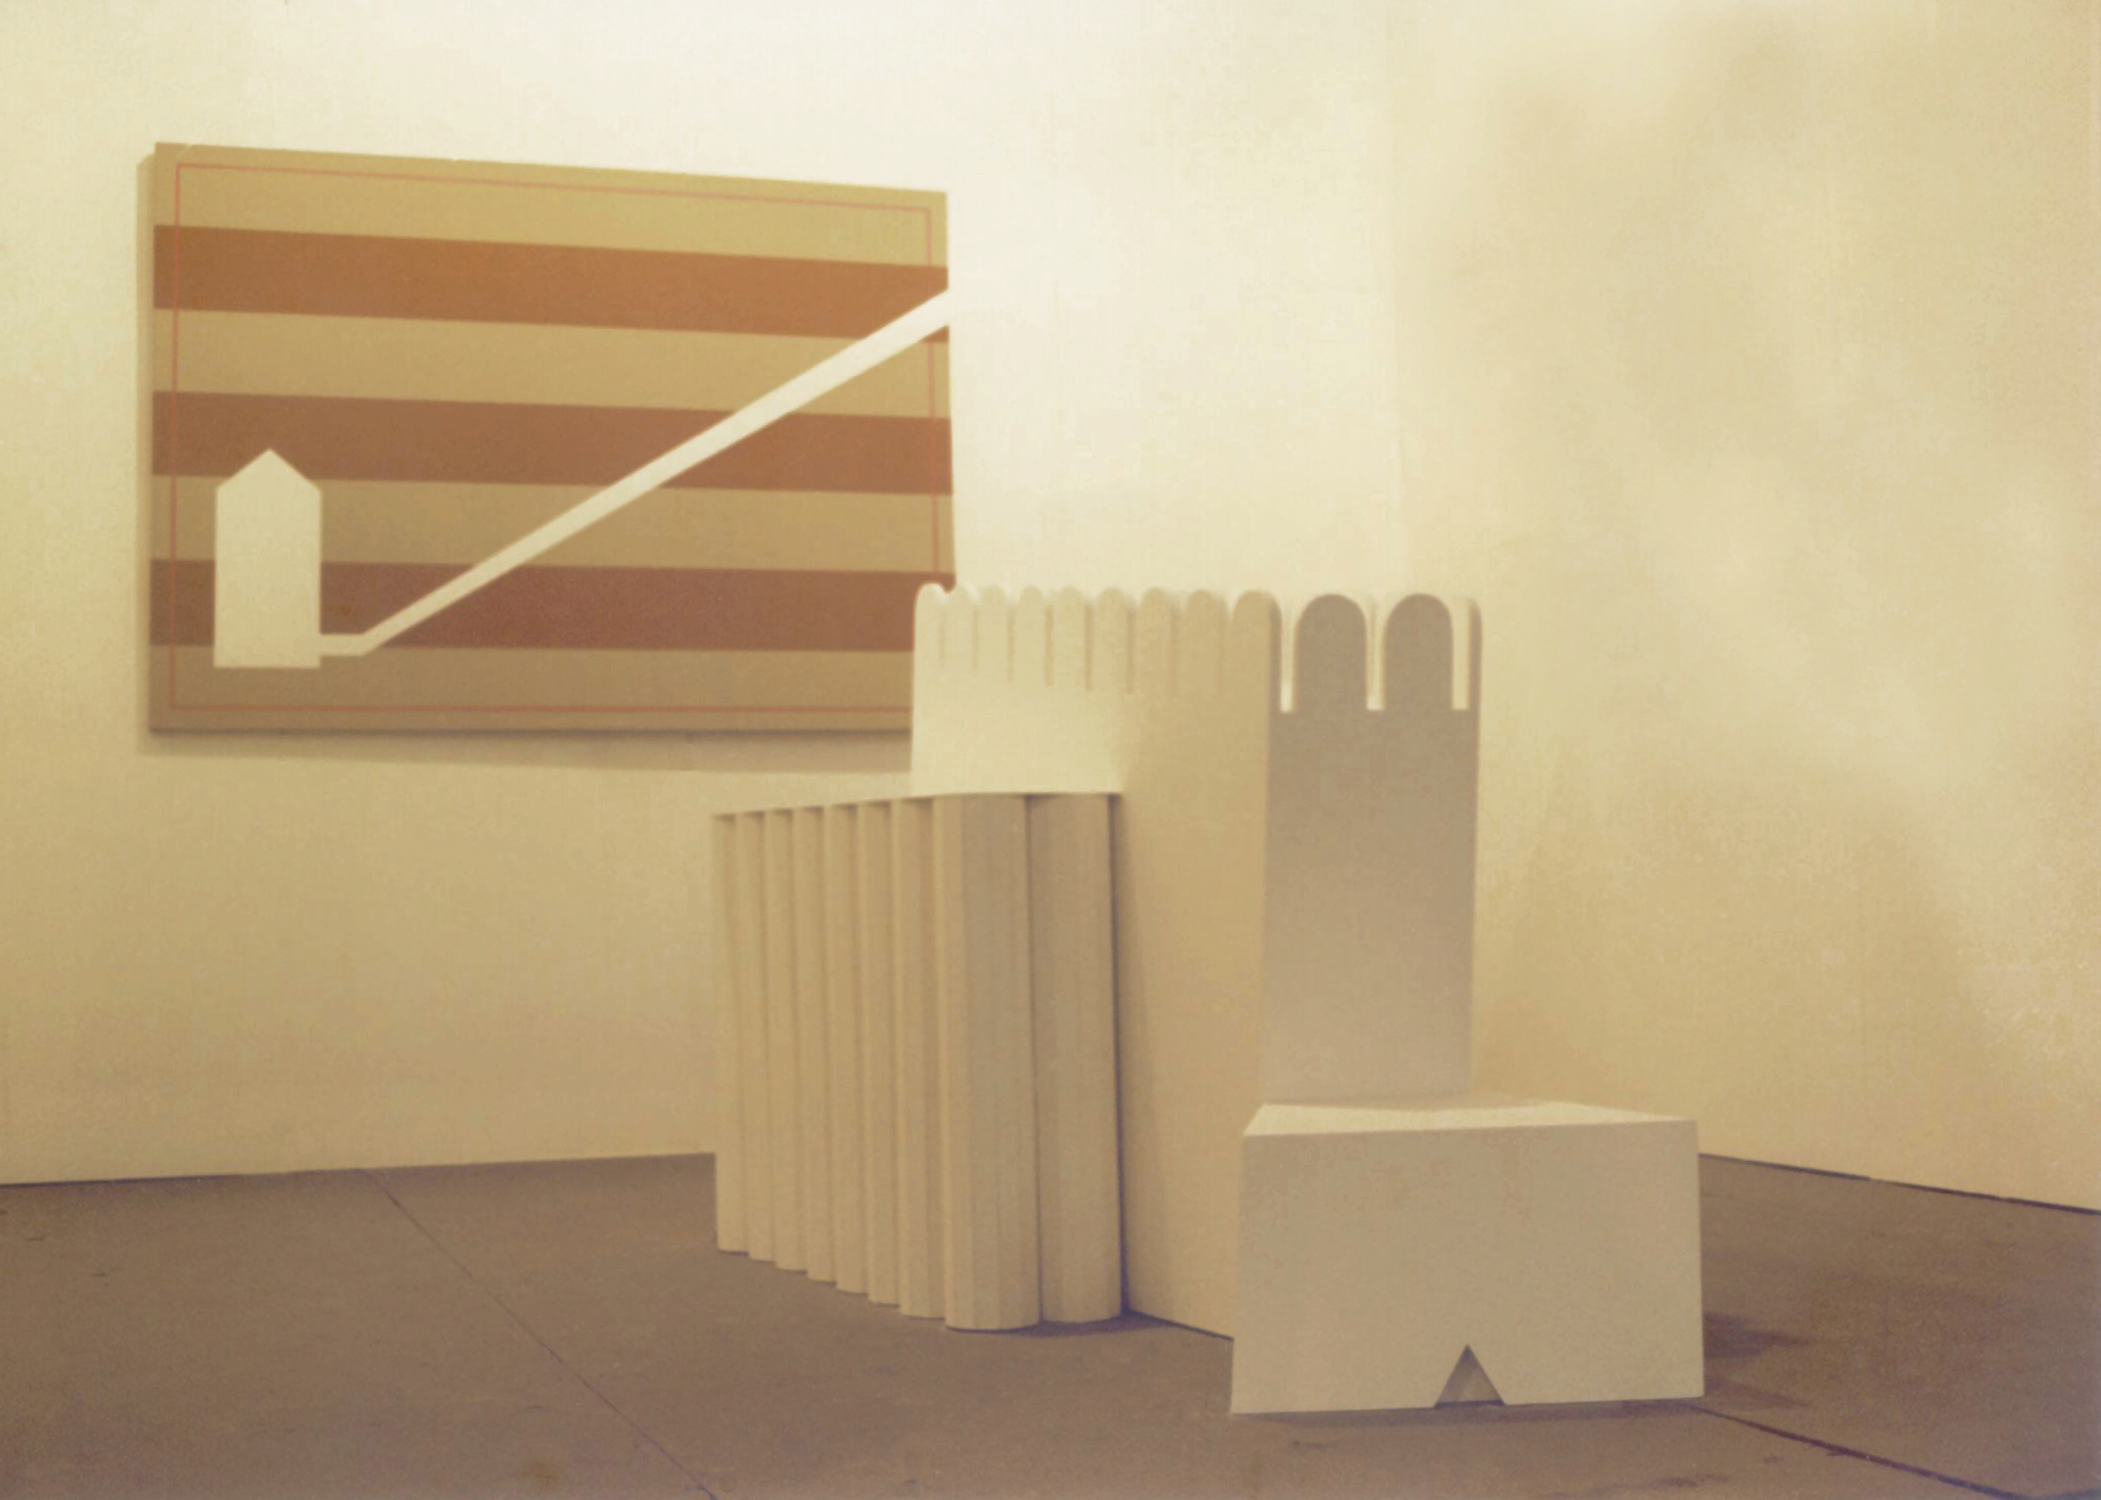   Burial Chamber I, 1998, sculpture:
painted wood, 200 x 122 x 122 cm and painting: Chamber, 1998, acrylic on
canvas,140 x 100 cm. Installation view. Courtesy: La Gaia Collection, Italy  






  
  
   
  
  

  
  
   Normal 
   0 
   
   
   
   
